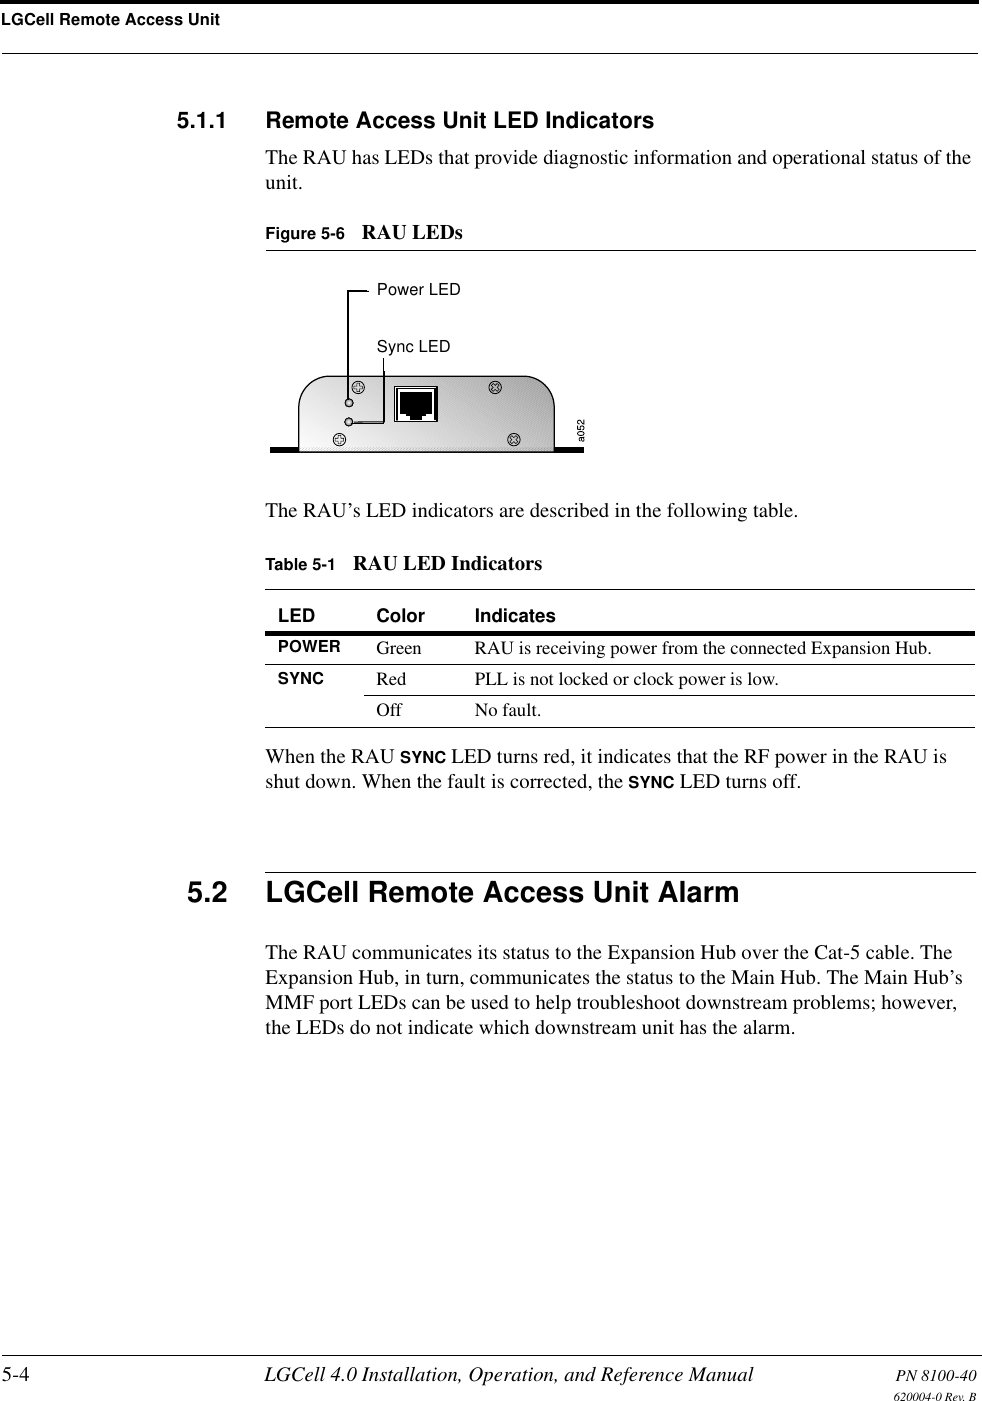 LGCell Remote Access Unit5-4 LGCell 4.0 Installation, Operation, and Reference Manual PN 8100-40620004-0 Rev. B5.1.1 Remote Access Unit LED IndicatorsThe RAU has LEDs that provide diagnostic information and operational status of the unit.Figure 5-6 RAU LEDsThe RAU’s LED indicators are described in the following table.When the RAU SYNC LED turns red, it indicates that the RF power in the RAU is shut down. When the fault is corrected, the SYNC LED turns off.5.2 LGCell Remote Access Unit AlarmThe RAU communicates its status to the Expansion Hub over the Cat-5 cable. The Expansion Hub, in turn, communicates the status to the Main Hub. The Main Hub’s MMF port LEDs can be used to help troubleshoot downstream problems; however, the LEDs do not indicate which downstream unit has the alarm.Table 5-1 RAU LED IndicatorsLED Color IndicatesPOWER Green RAU is receiving power from the connected Expansion Hub.SYNC Red PLL is not locked or clock power is low.Off No fault.Power LEDSync LED